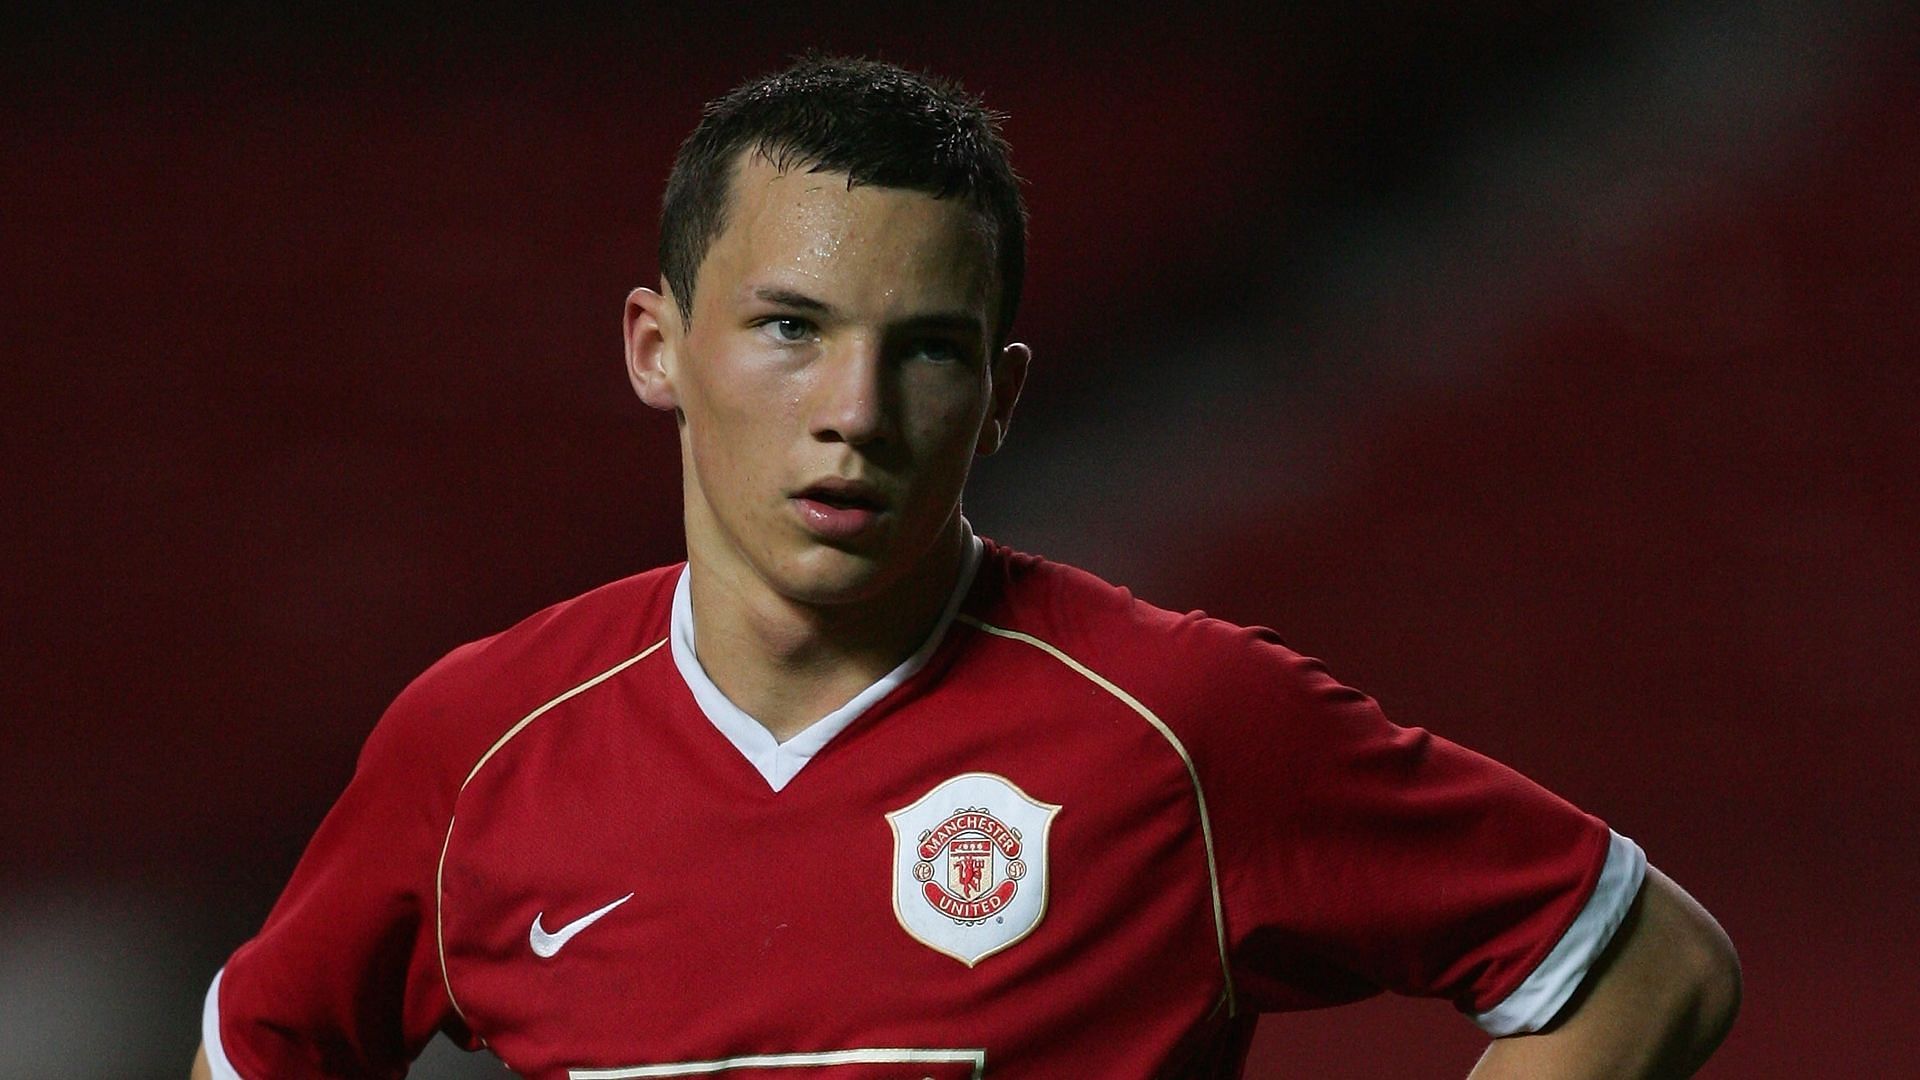 Danny Drinkwater has been on loan for the past few seasons